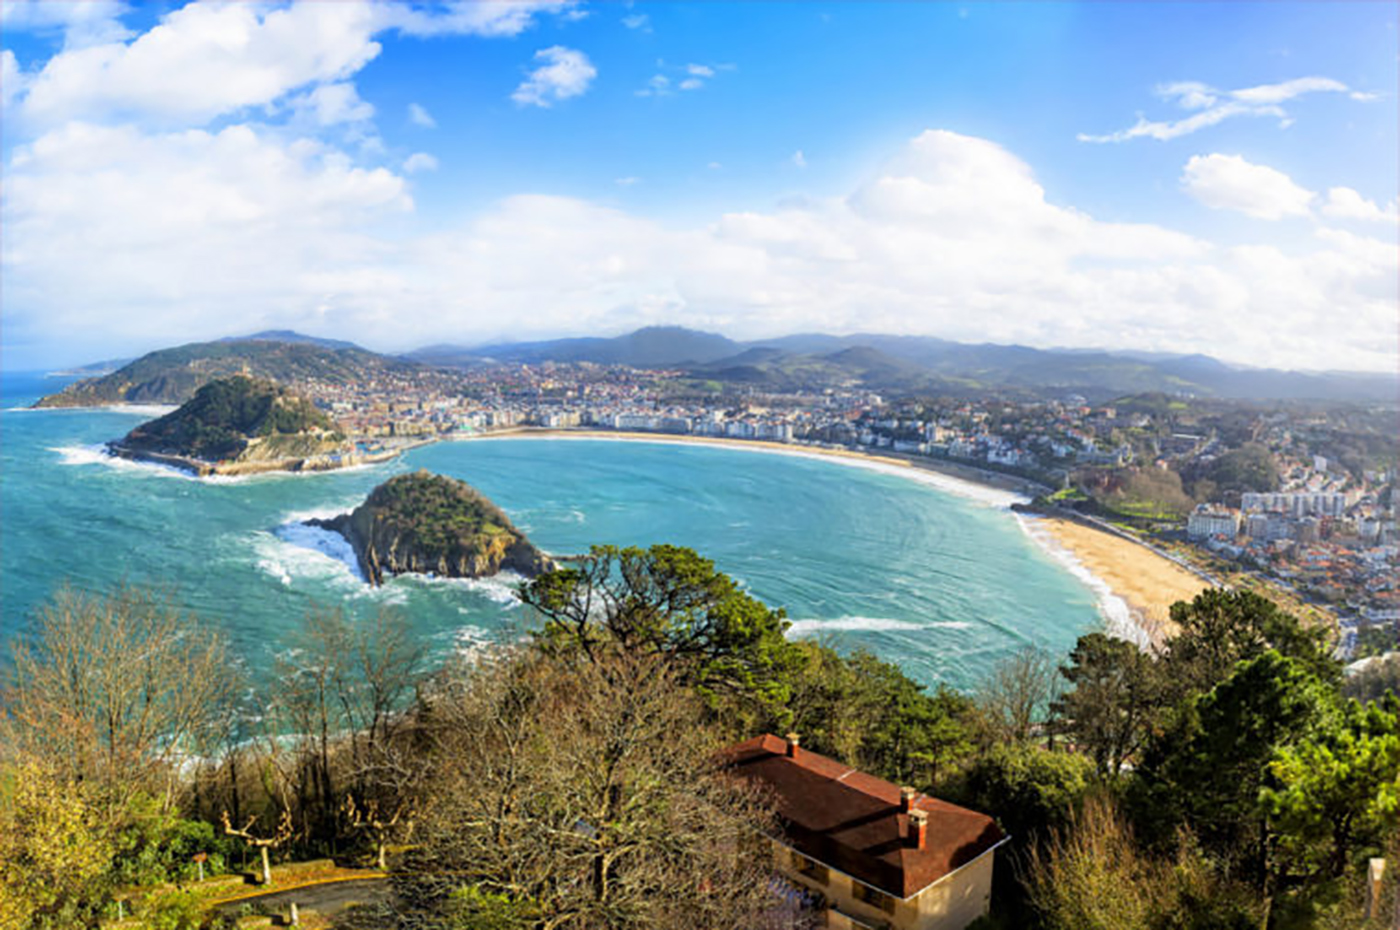 San Sebastian, Spain "Ever since reading The Sun Also Rises in high school, Hemingway’s retreat to San Sebastian has always been a dream of mine. In addition to laying on the beach with a stack of (Hemingway) novels, I’d sip cortados, soak up the architecture, and hop from one pintxo bar to the next, eating all the octopus, jamon, and crusty grilled bread in site." -- Camille Styles